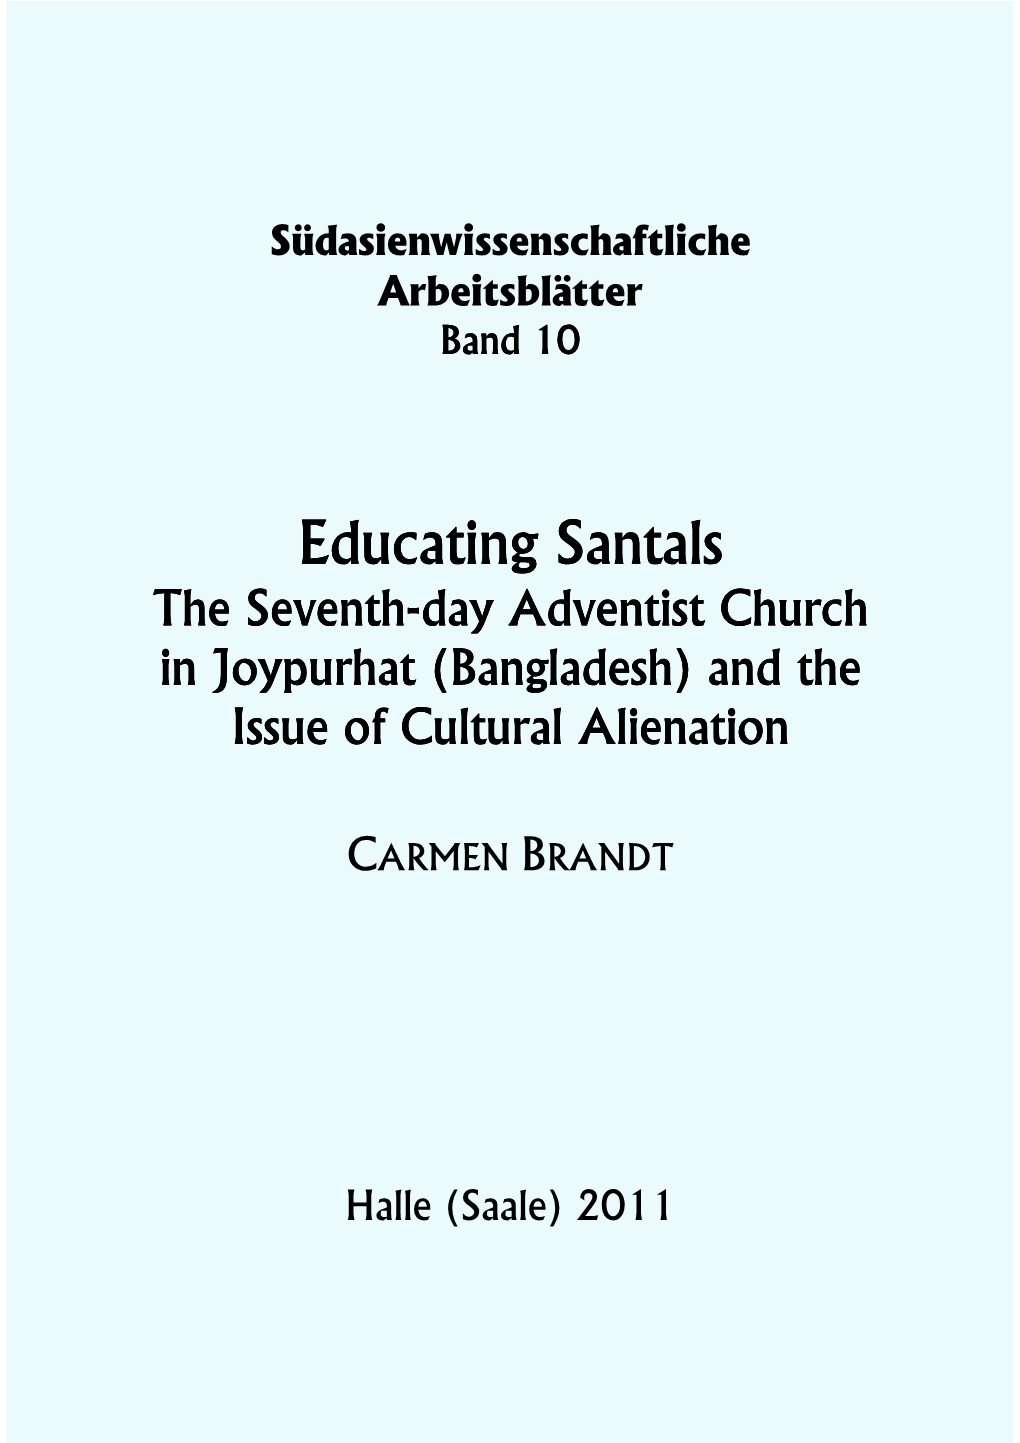 Educating Santals the Seventh-Day Adventist Church in Joypurhat (Bangladesh) and the Issue of Cultural Alienation